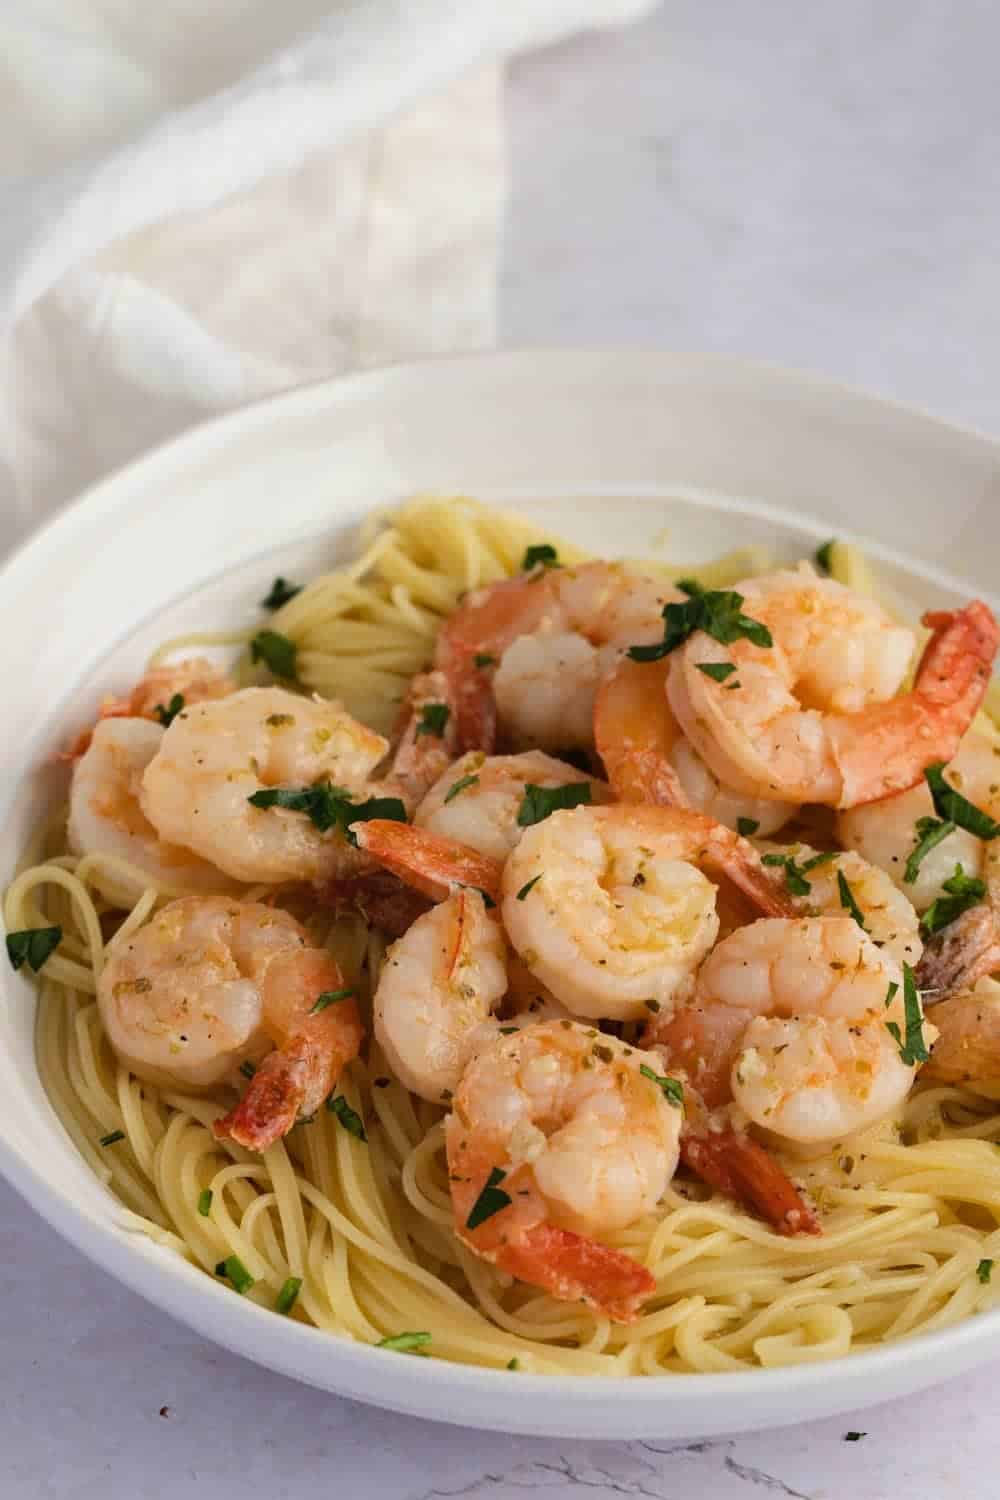 Buttery and Tender Red Lobster Shrimp Scampi with Pasta Served on a White Plate, Garnished with Chopped Parsley.
